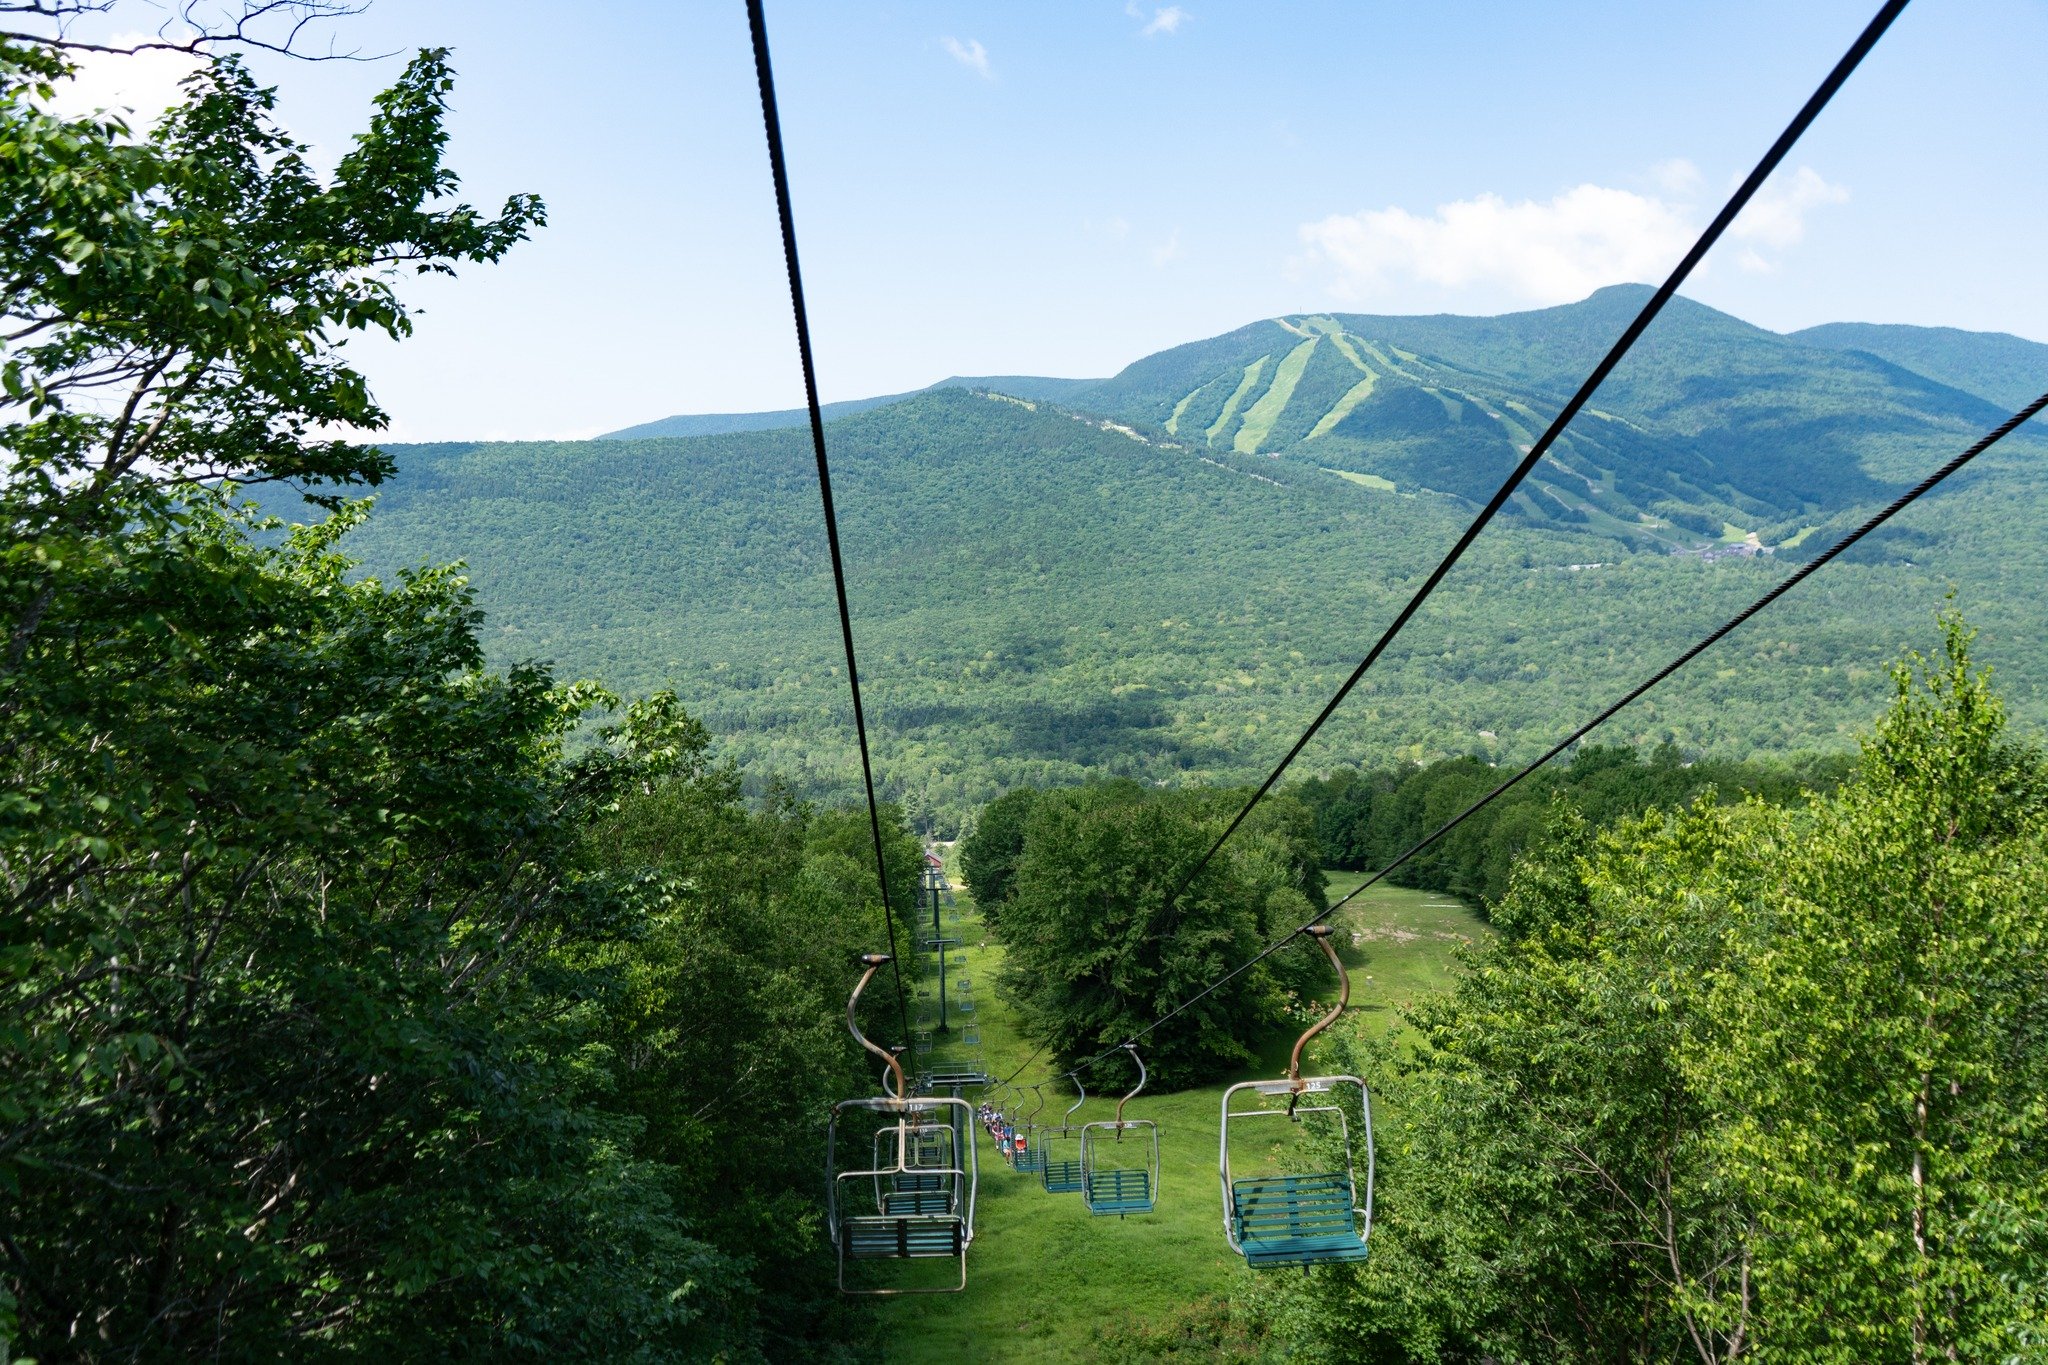 Snow's Mountain Season is here 🏔️ Enjoy scenic chairlift rides, an 18-hole disc golf course, lift-serviced mountain biking trails, waterfall hikes, and more!

Open Fridays, Saturdays, and Sundays. We'll be expanding hours as the summer heats up! 

L